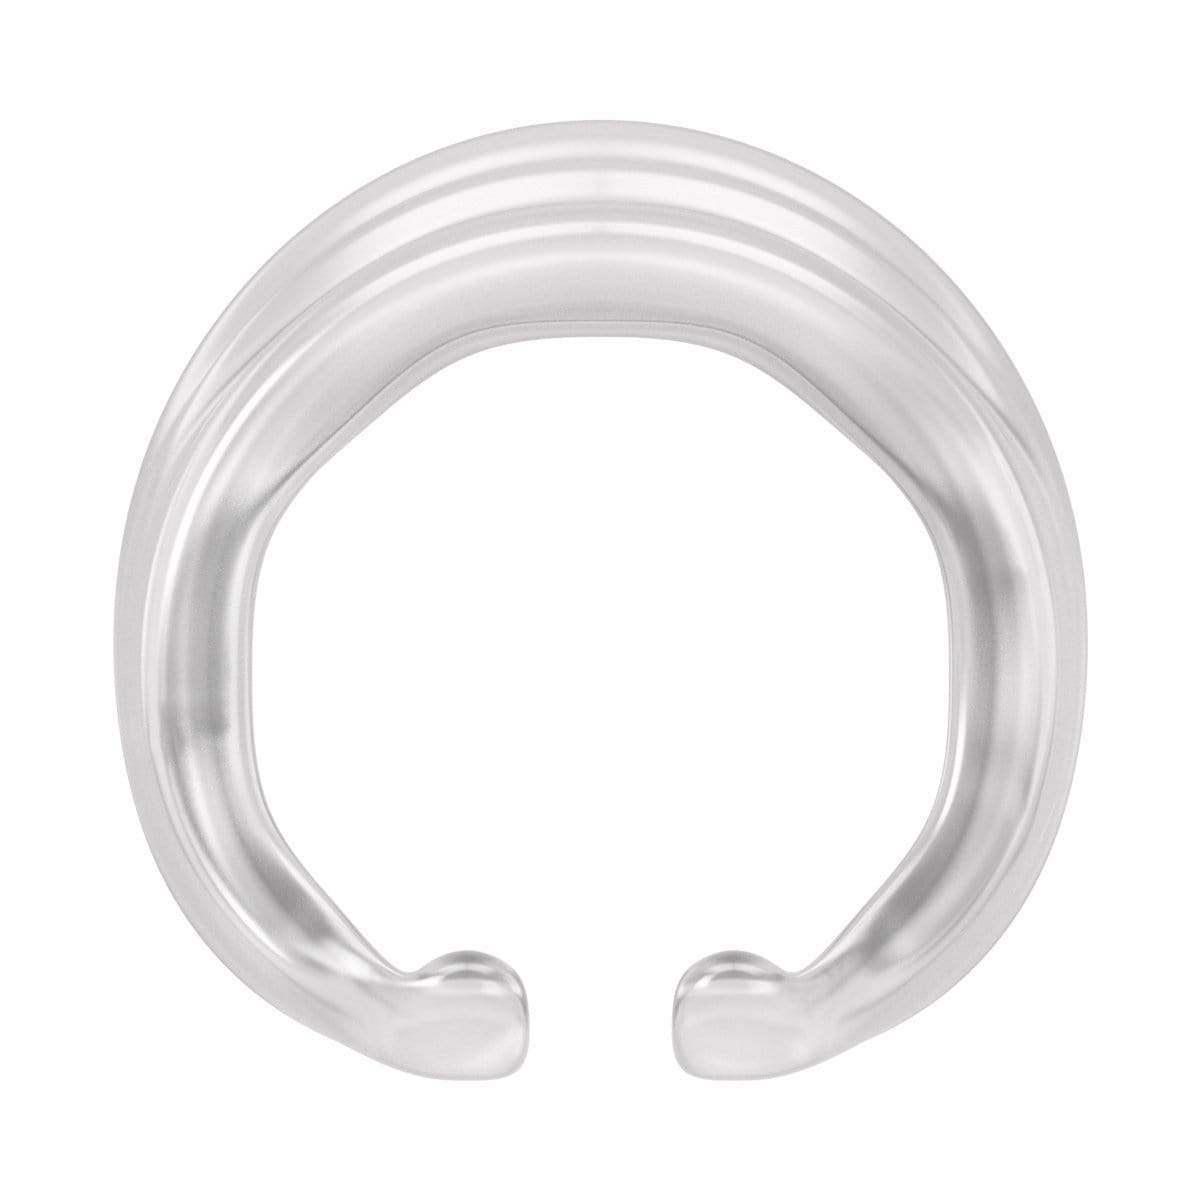 SSI Japan - My Peace Wide Soft Night Size M Correction Cock Ring (Clear) -  Cock Ring (Non Vibration)  Durio.sg